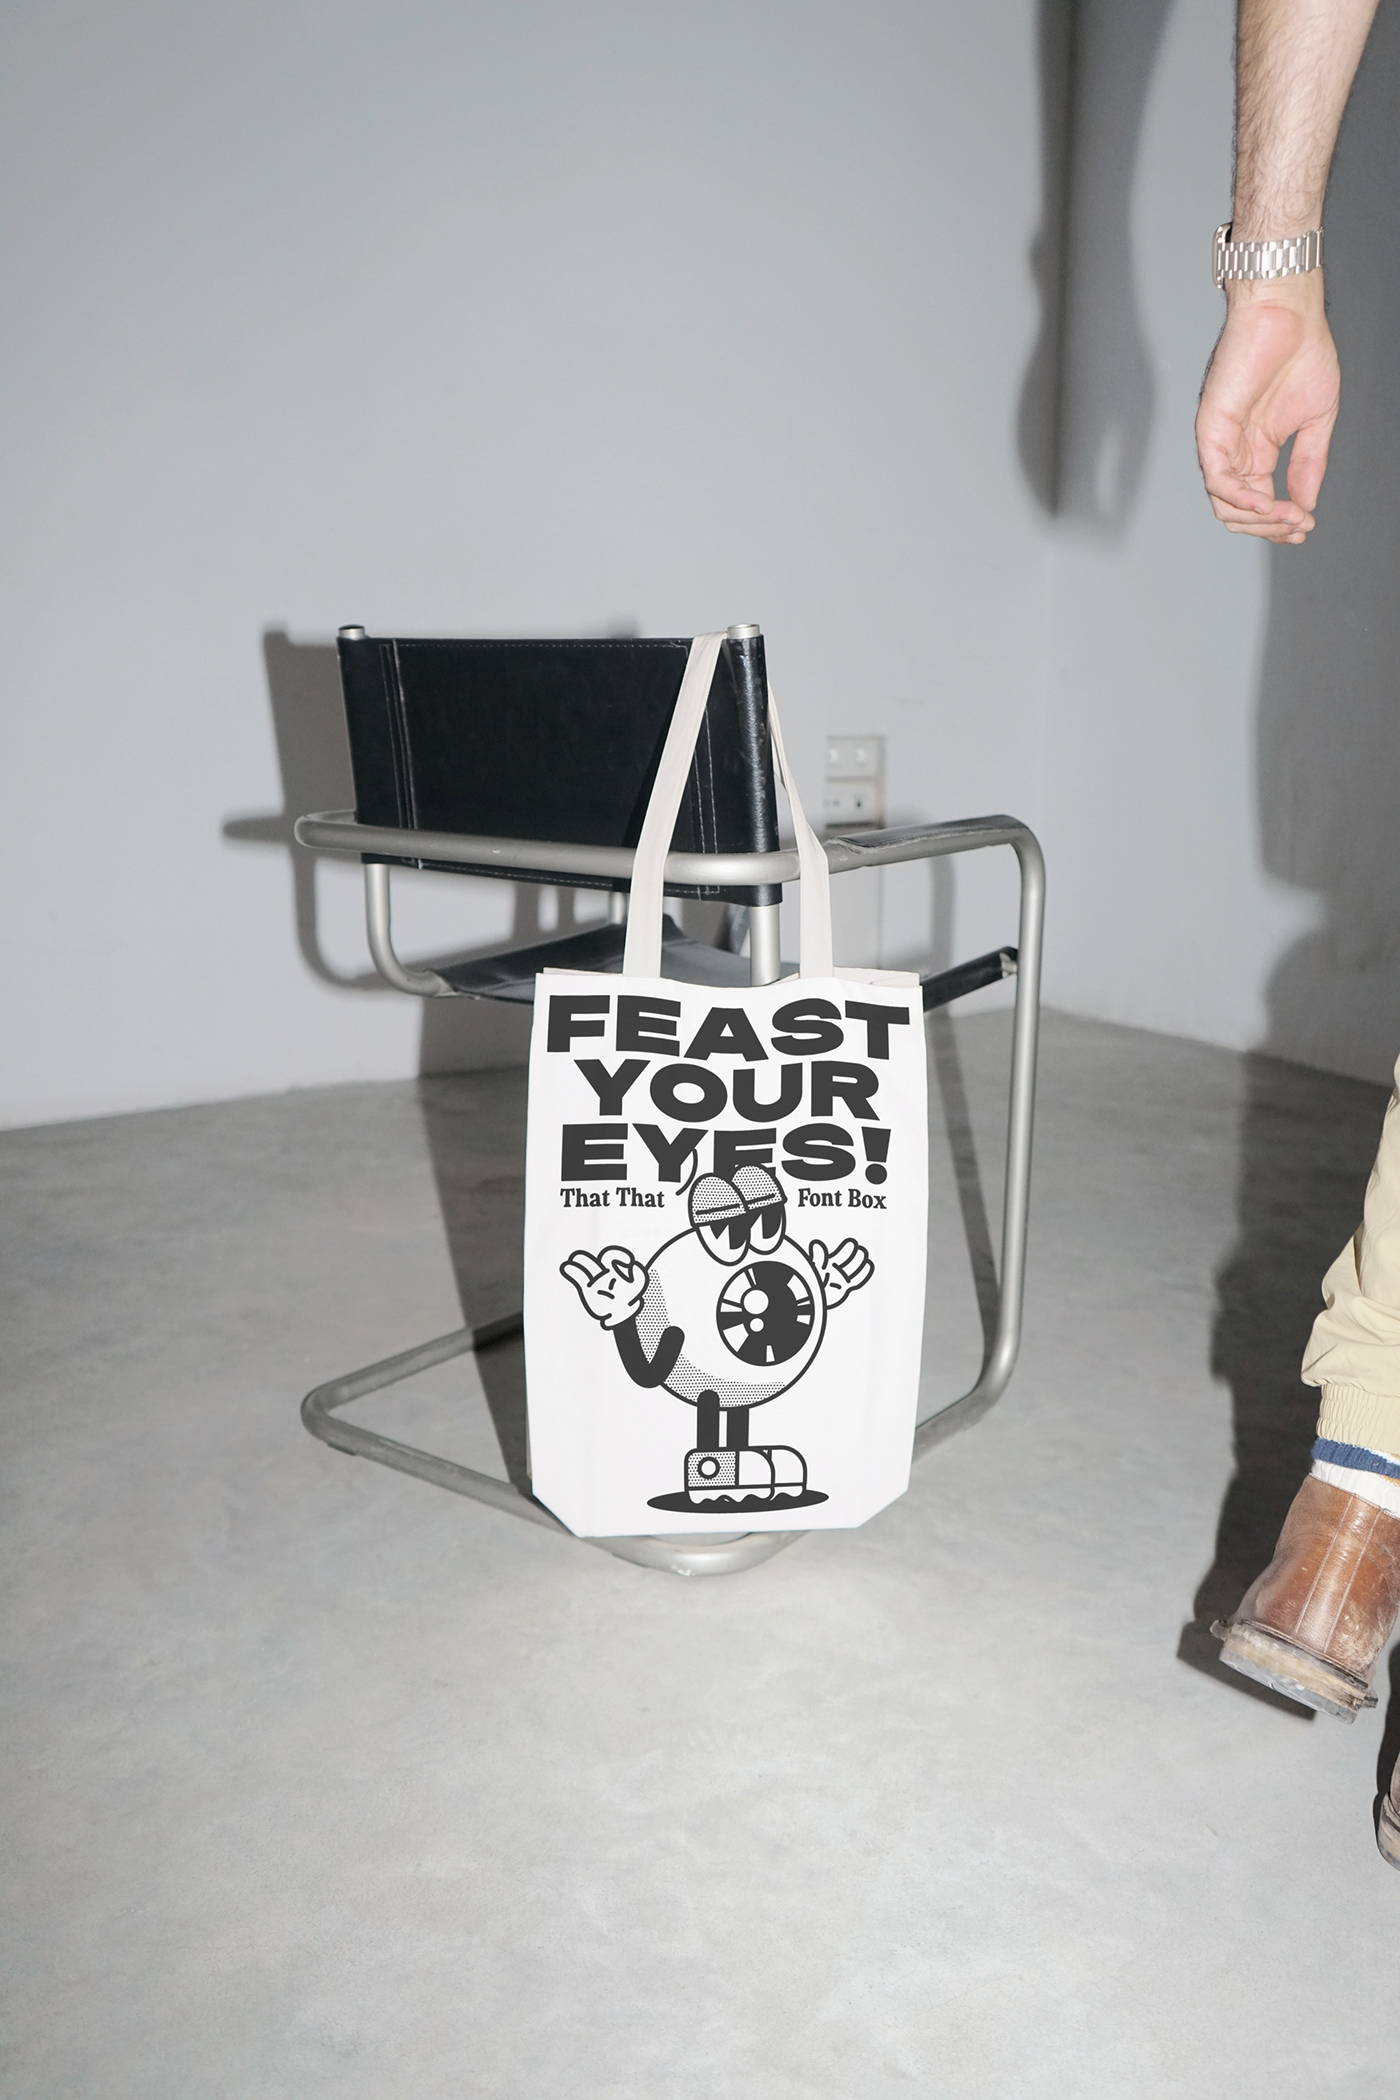 tote bag hanging on a chair. the bag has a graphic of a cartoon eyeball with eyeballs on it. 